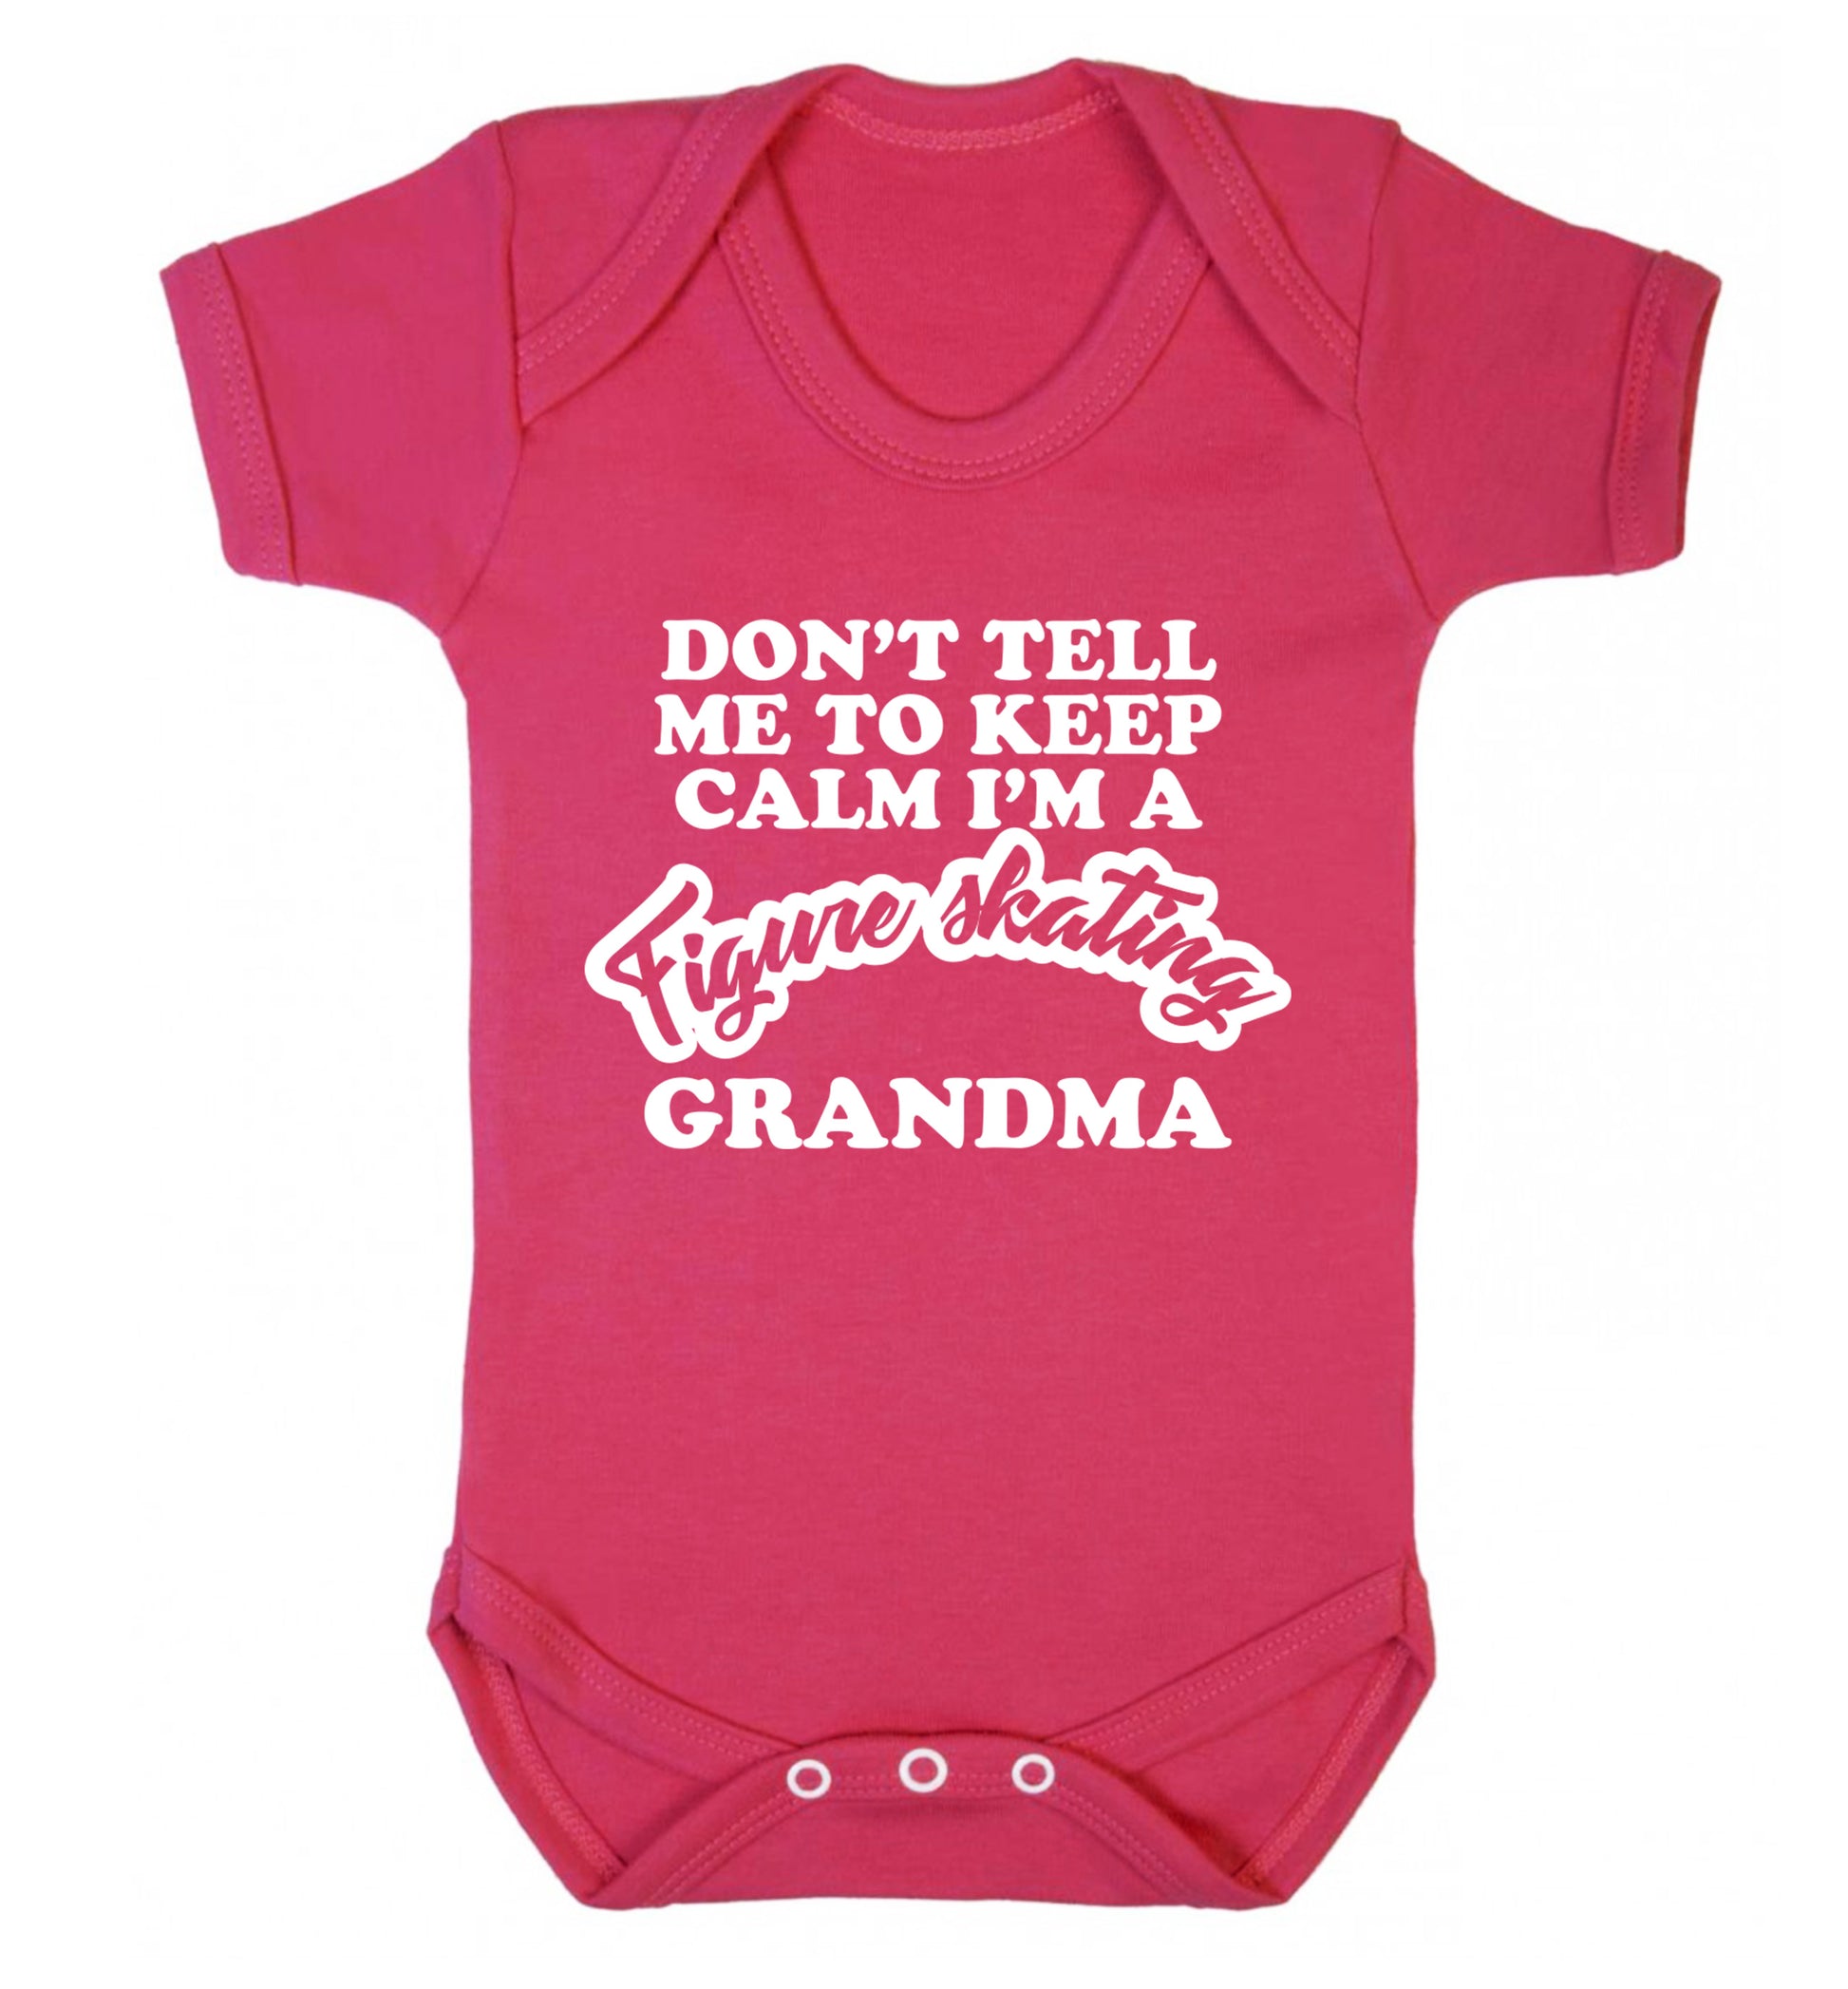 Don't tell me to keep calm I'm a figure skating grandma Baby Vest dark pink 18-24 months